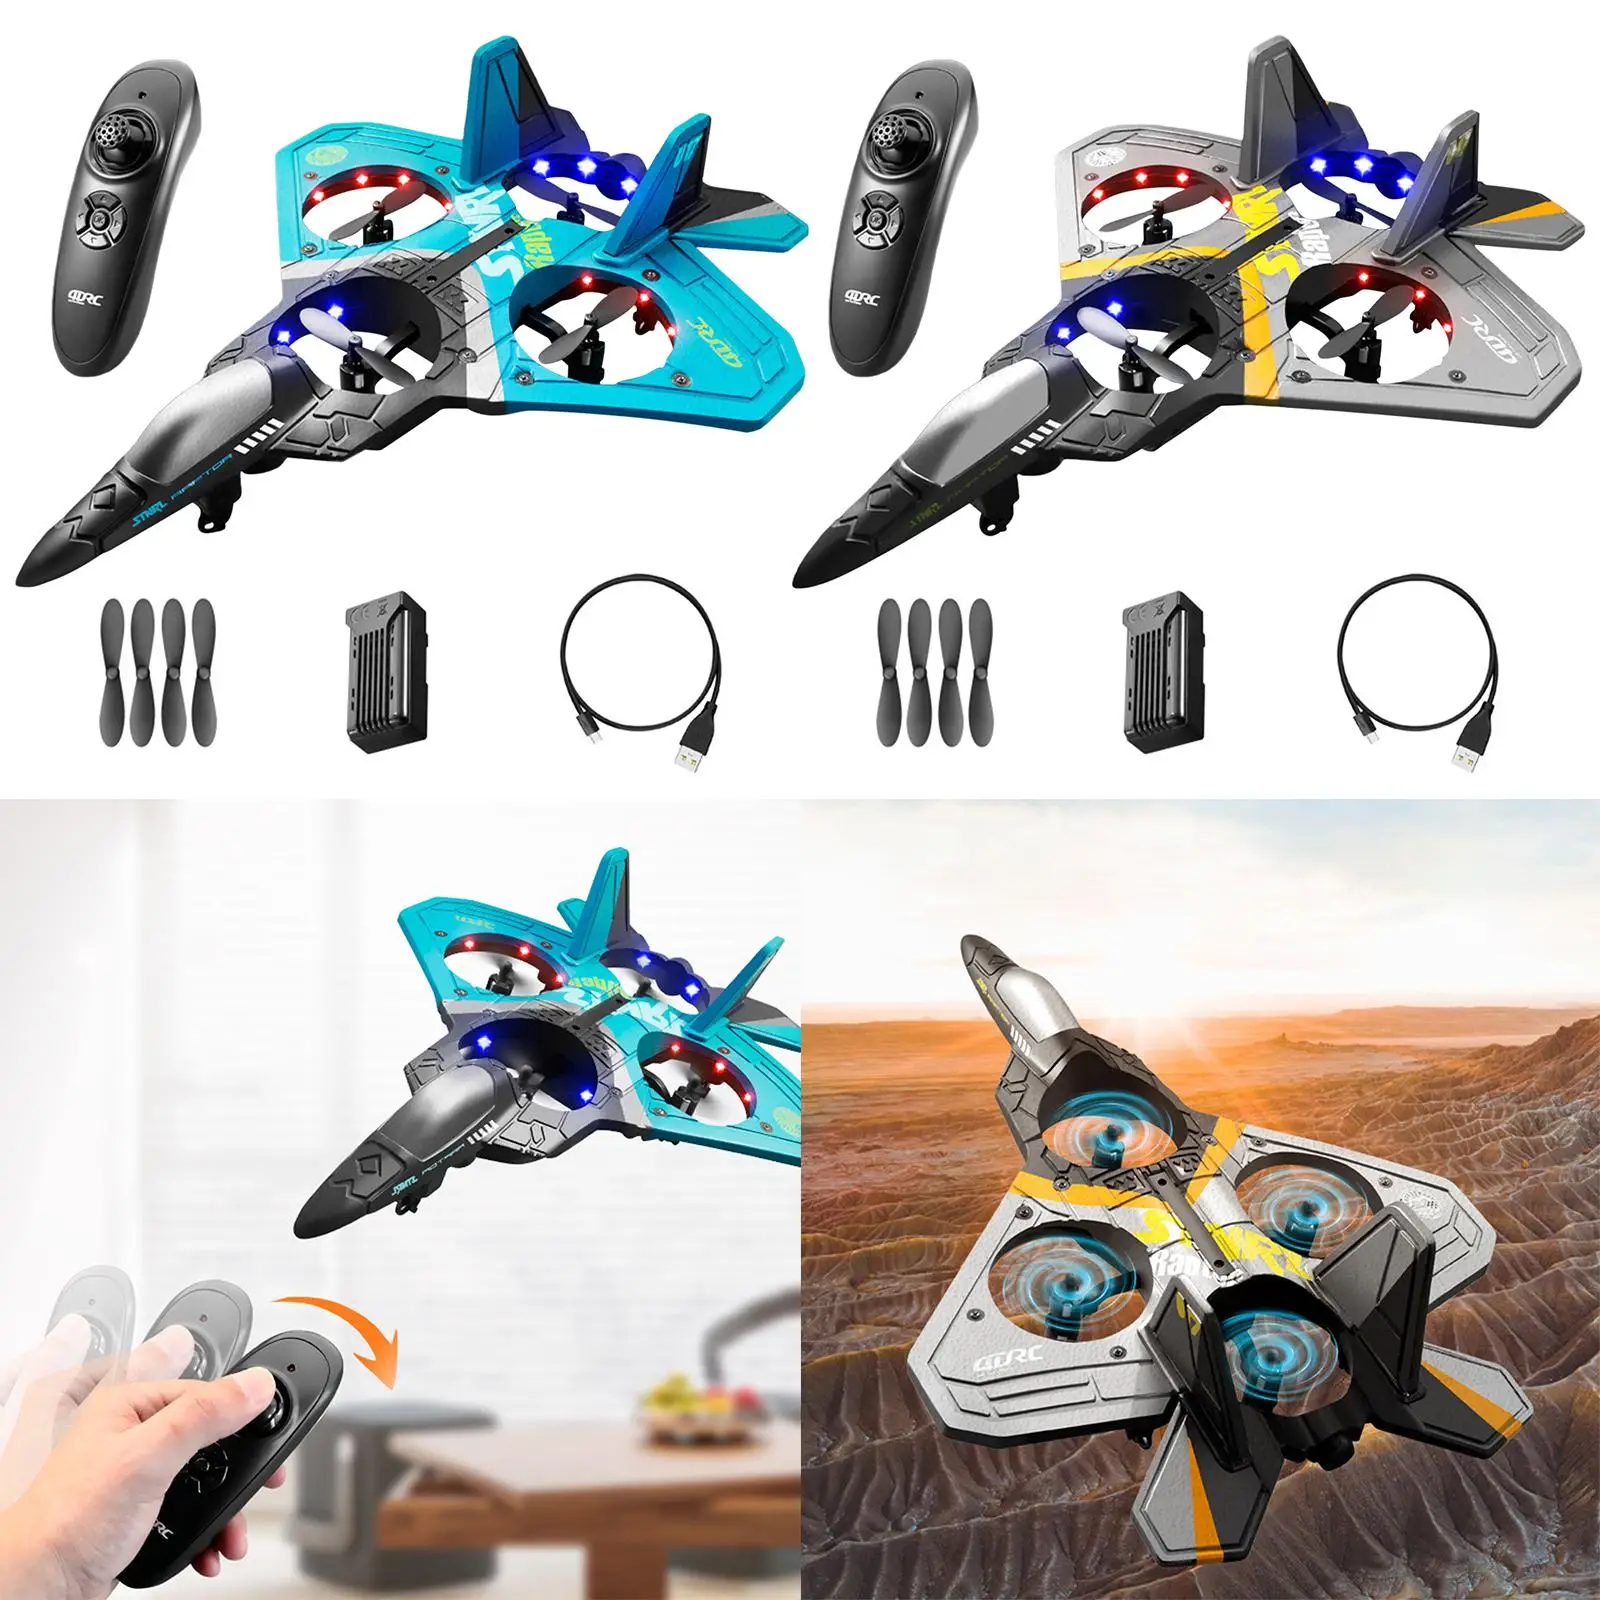 Simulation 2.4G Remote Control Aircraft Lightweight Fixed Wing for Beginners